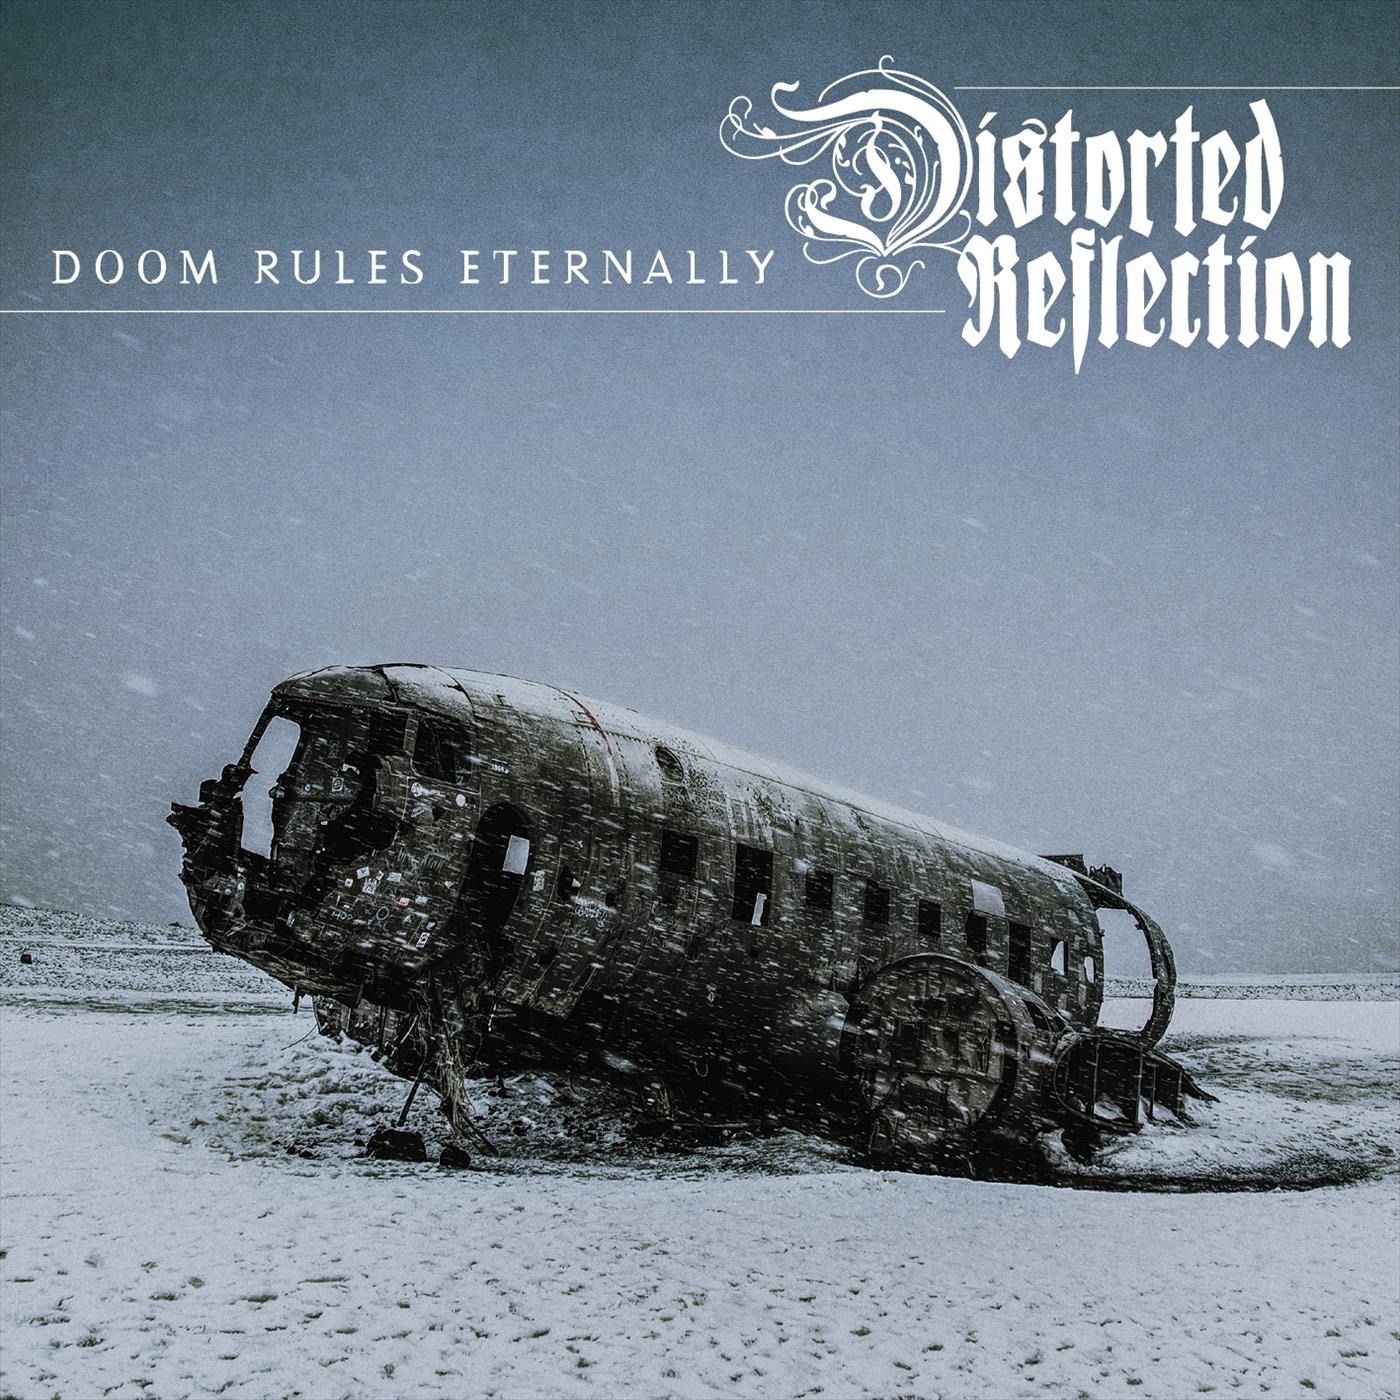 Doom Rules Eternally by Distorted Reflection